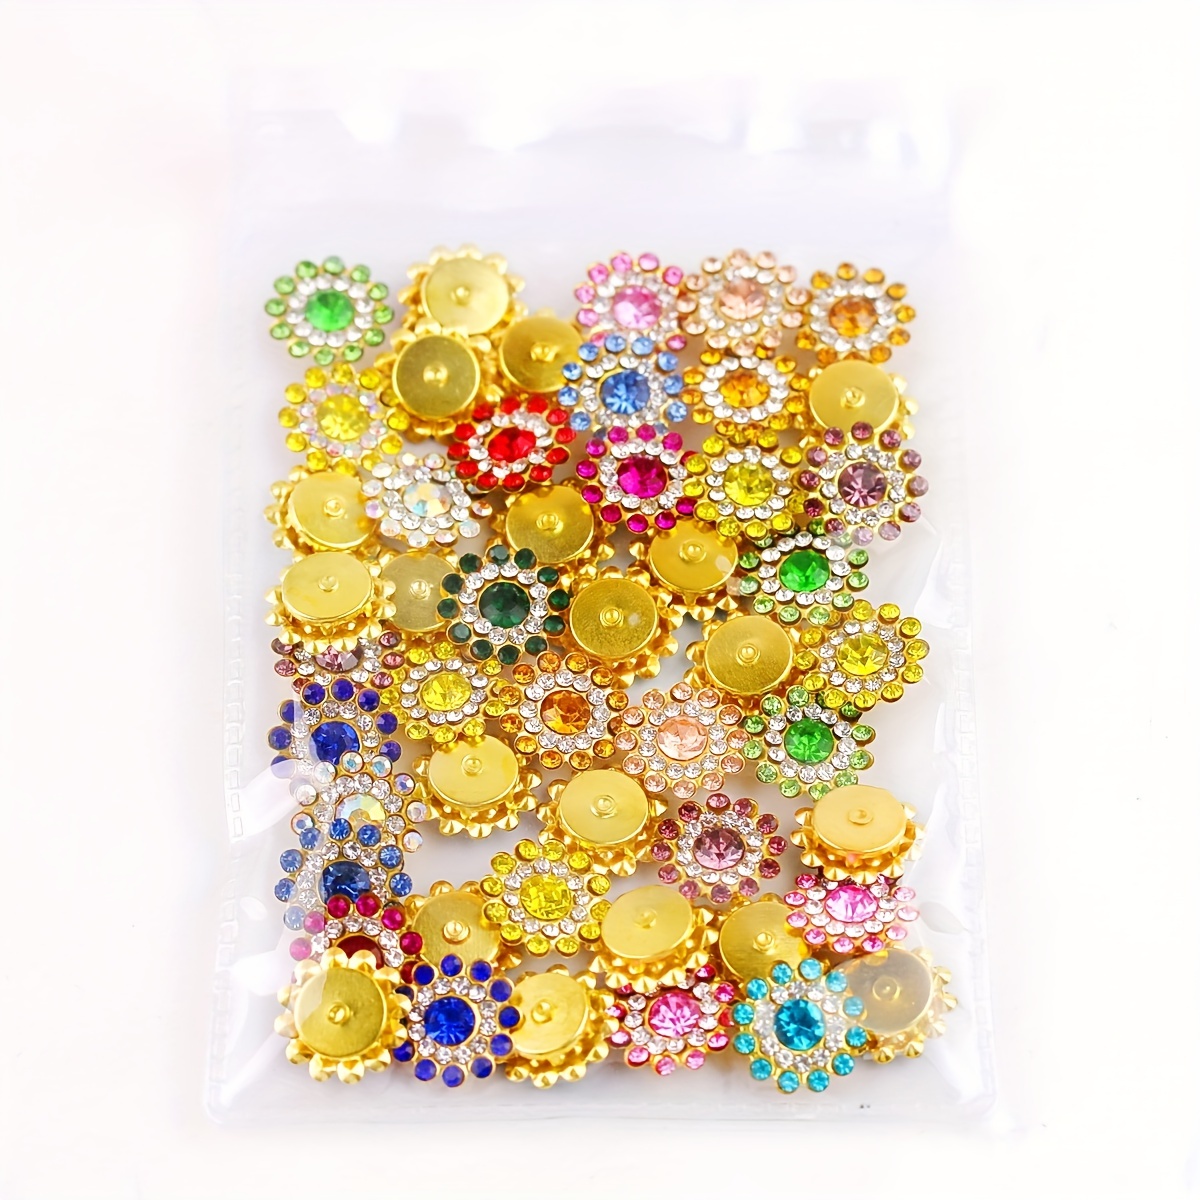 Feildoo 6 Different Sizes Of Round Rhinestones Flat Back Glass Rhinestones  For Diy Crafts Gifts For Friends,Rose Gold 